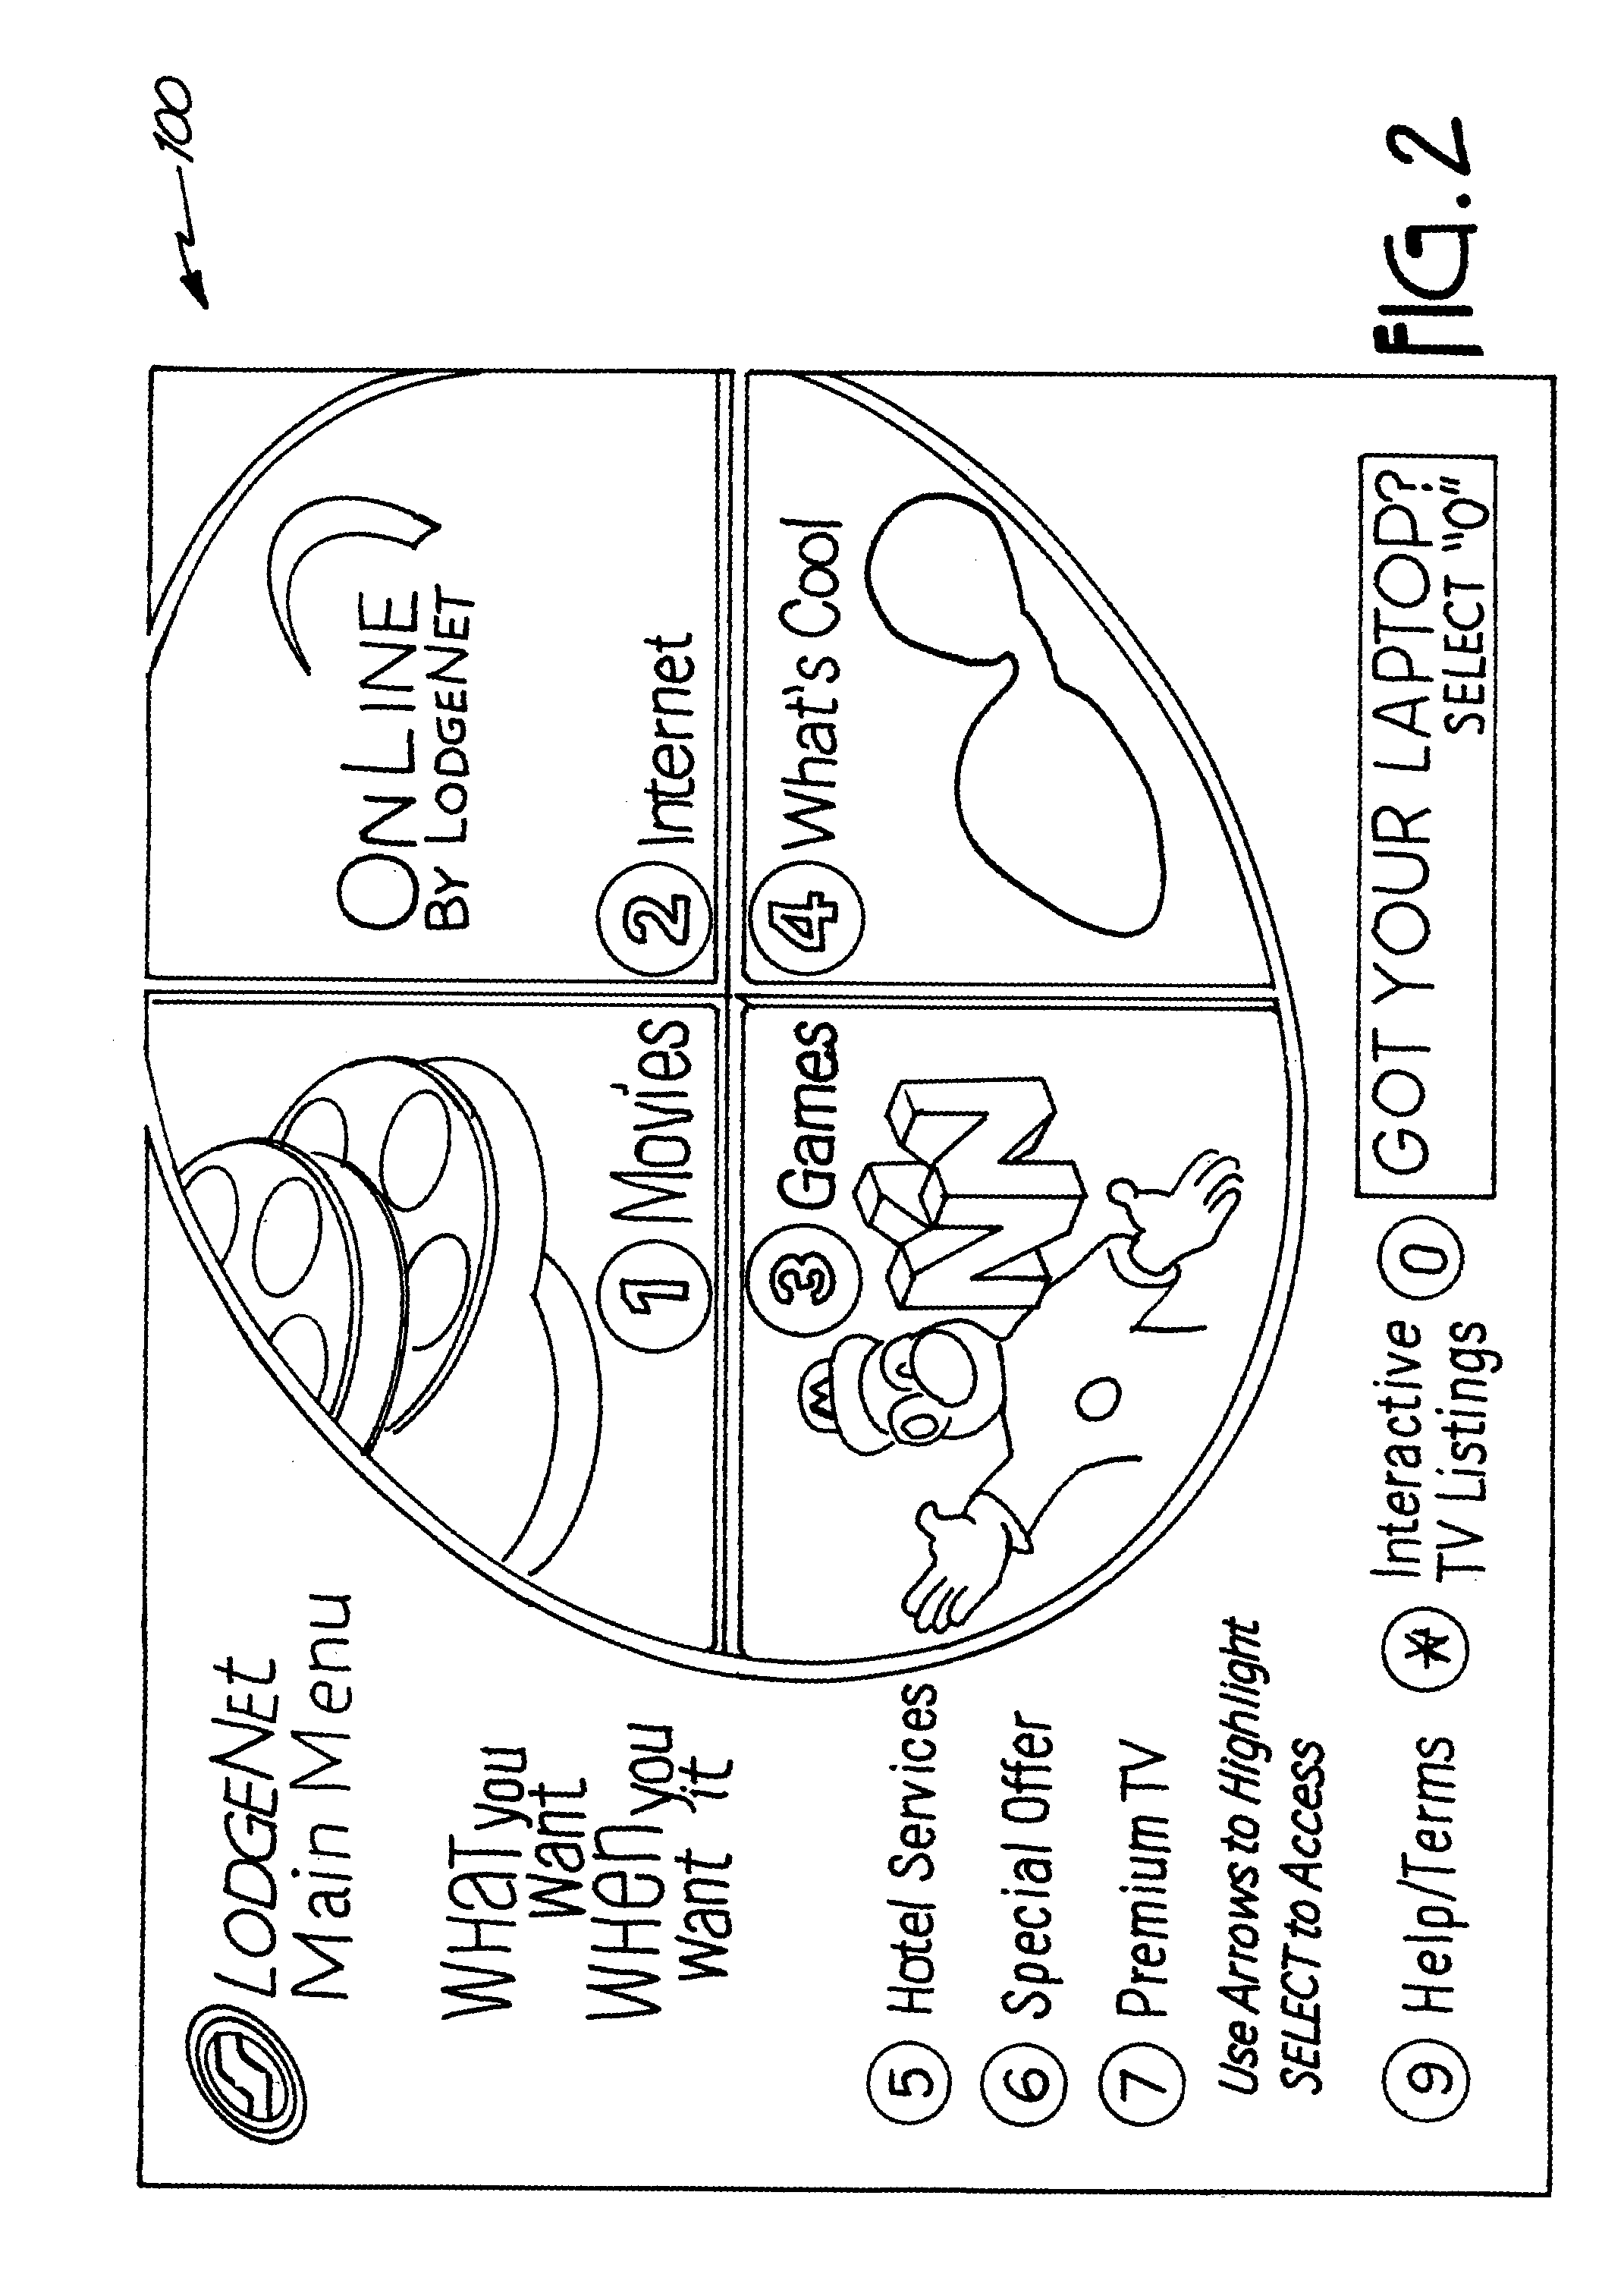 Lodging entertainment system with guest-selected time shifting